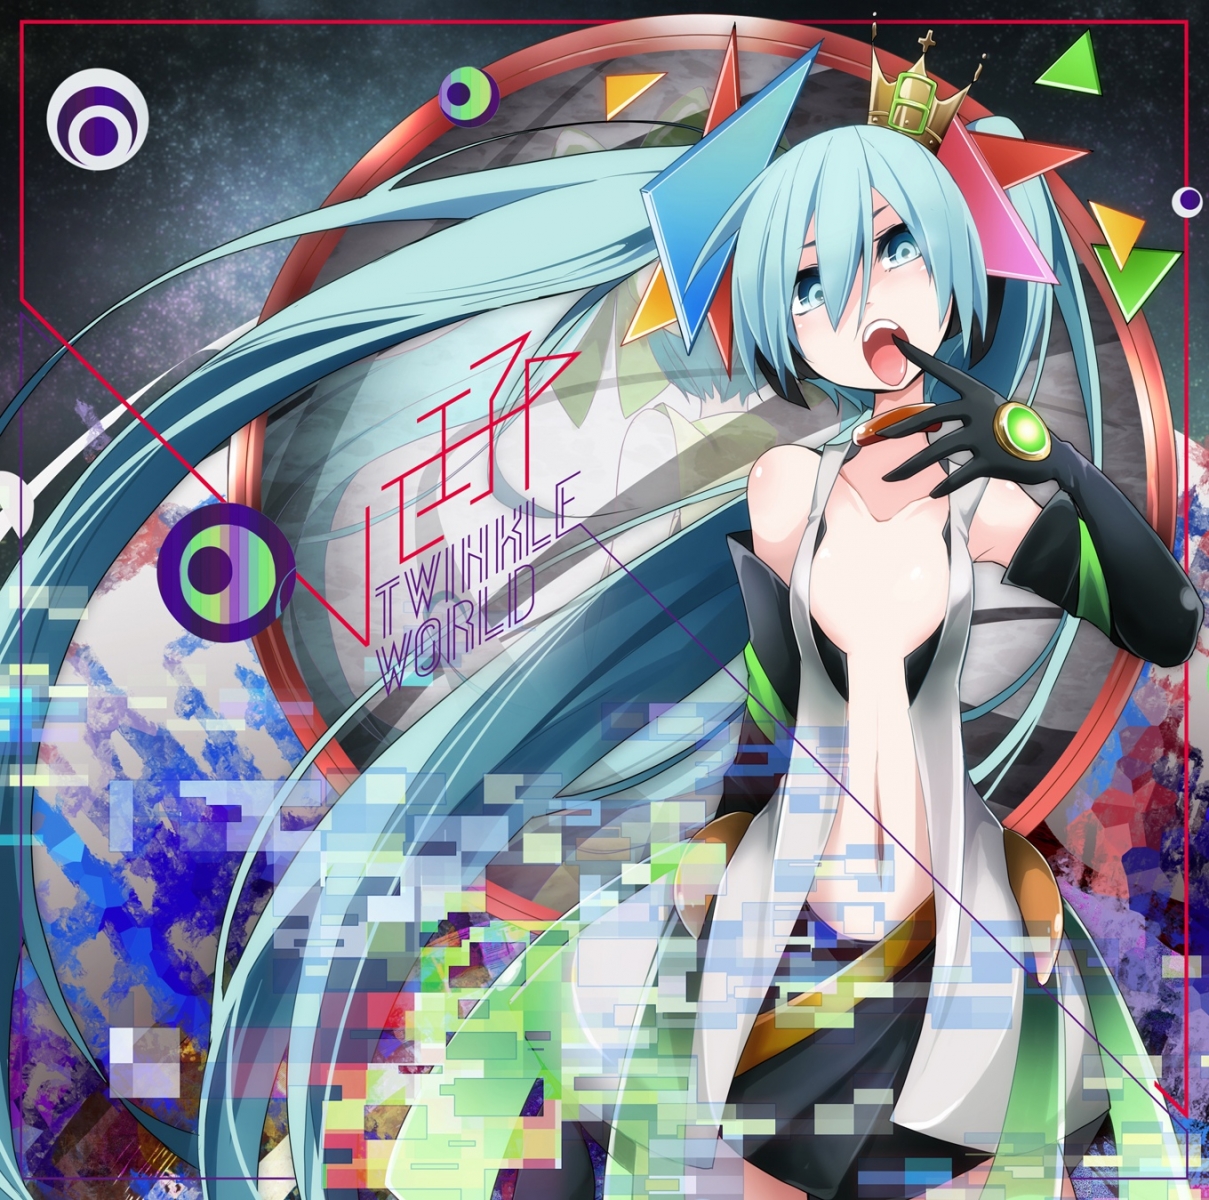 Check Out the Impish Miku-like MV for Vocaloid Song “Carry Me Off” by Hachioji-P